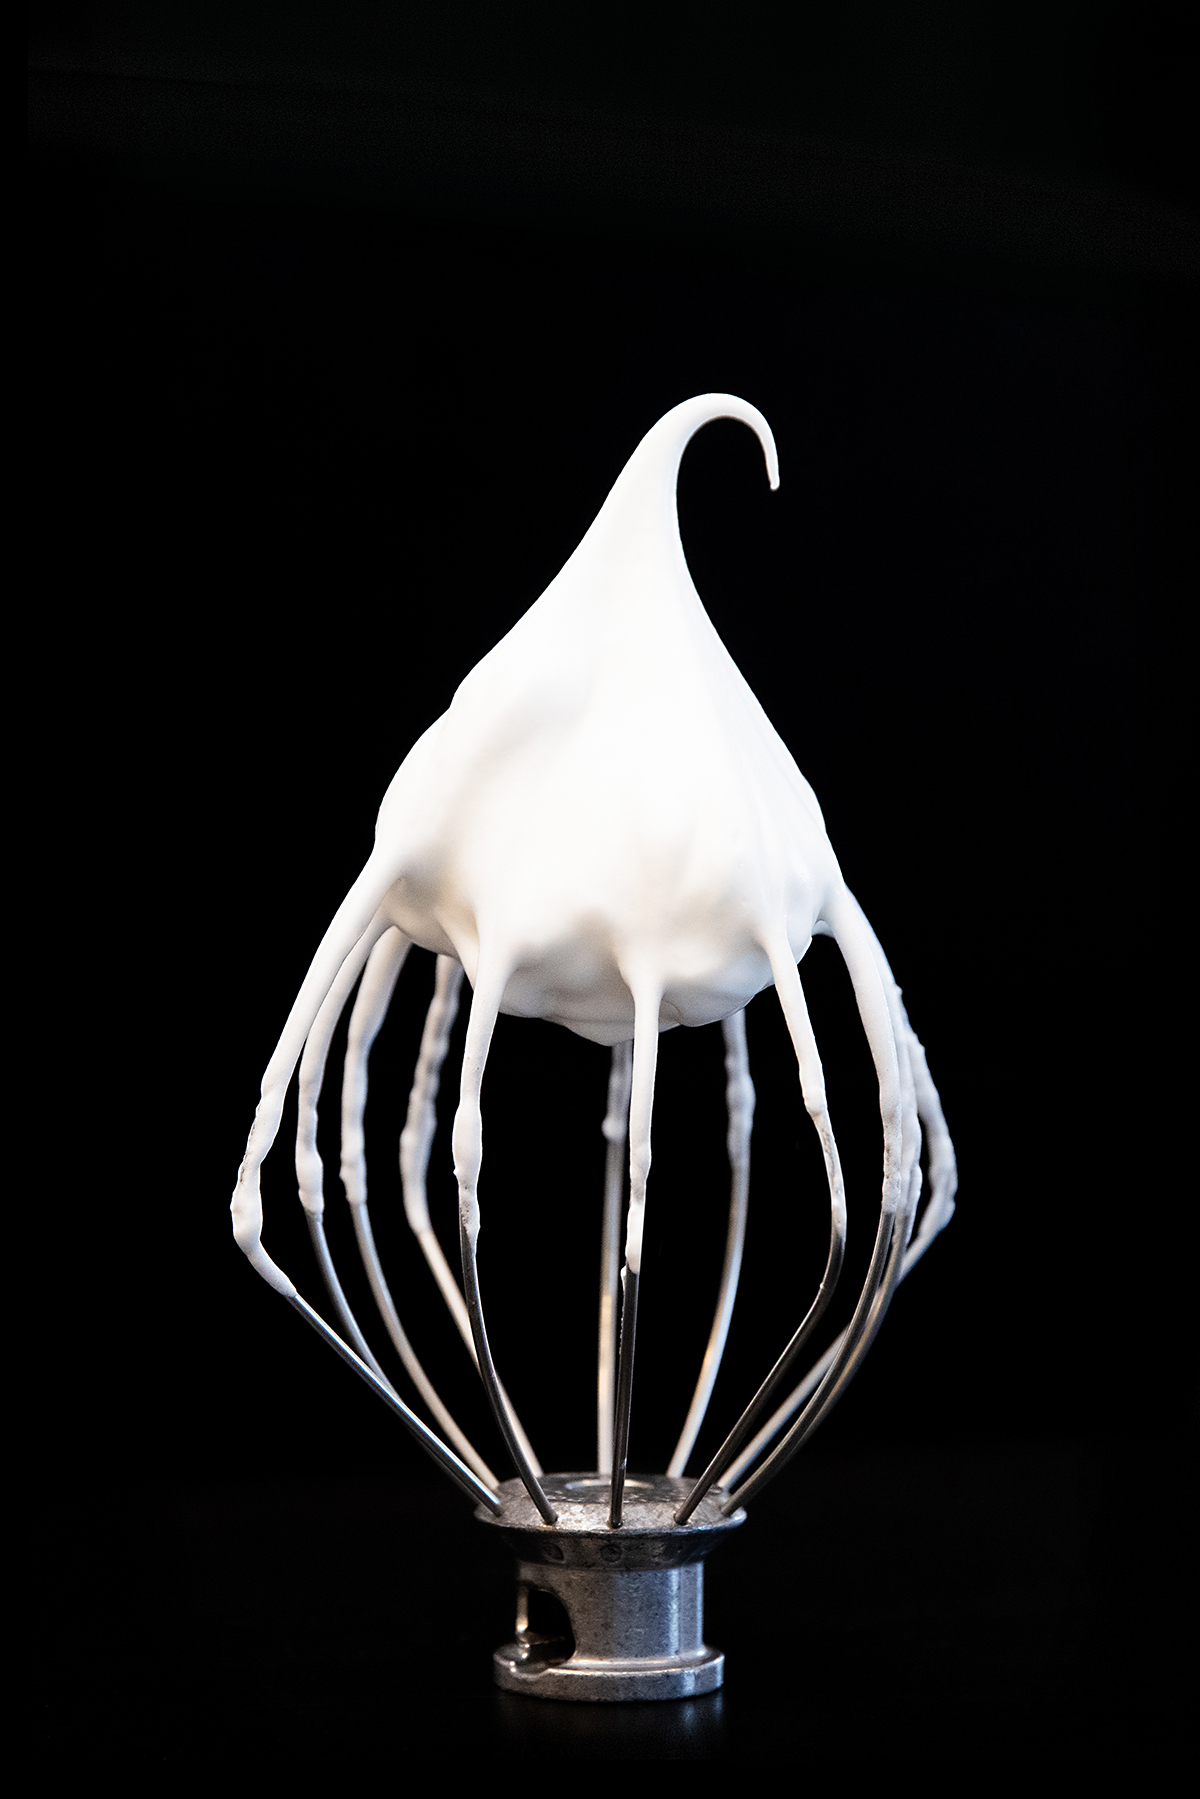 a white dripping icing on a diamond shaped object